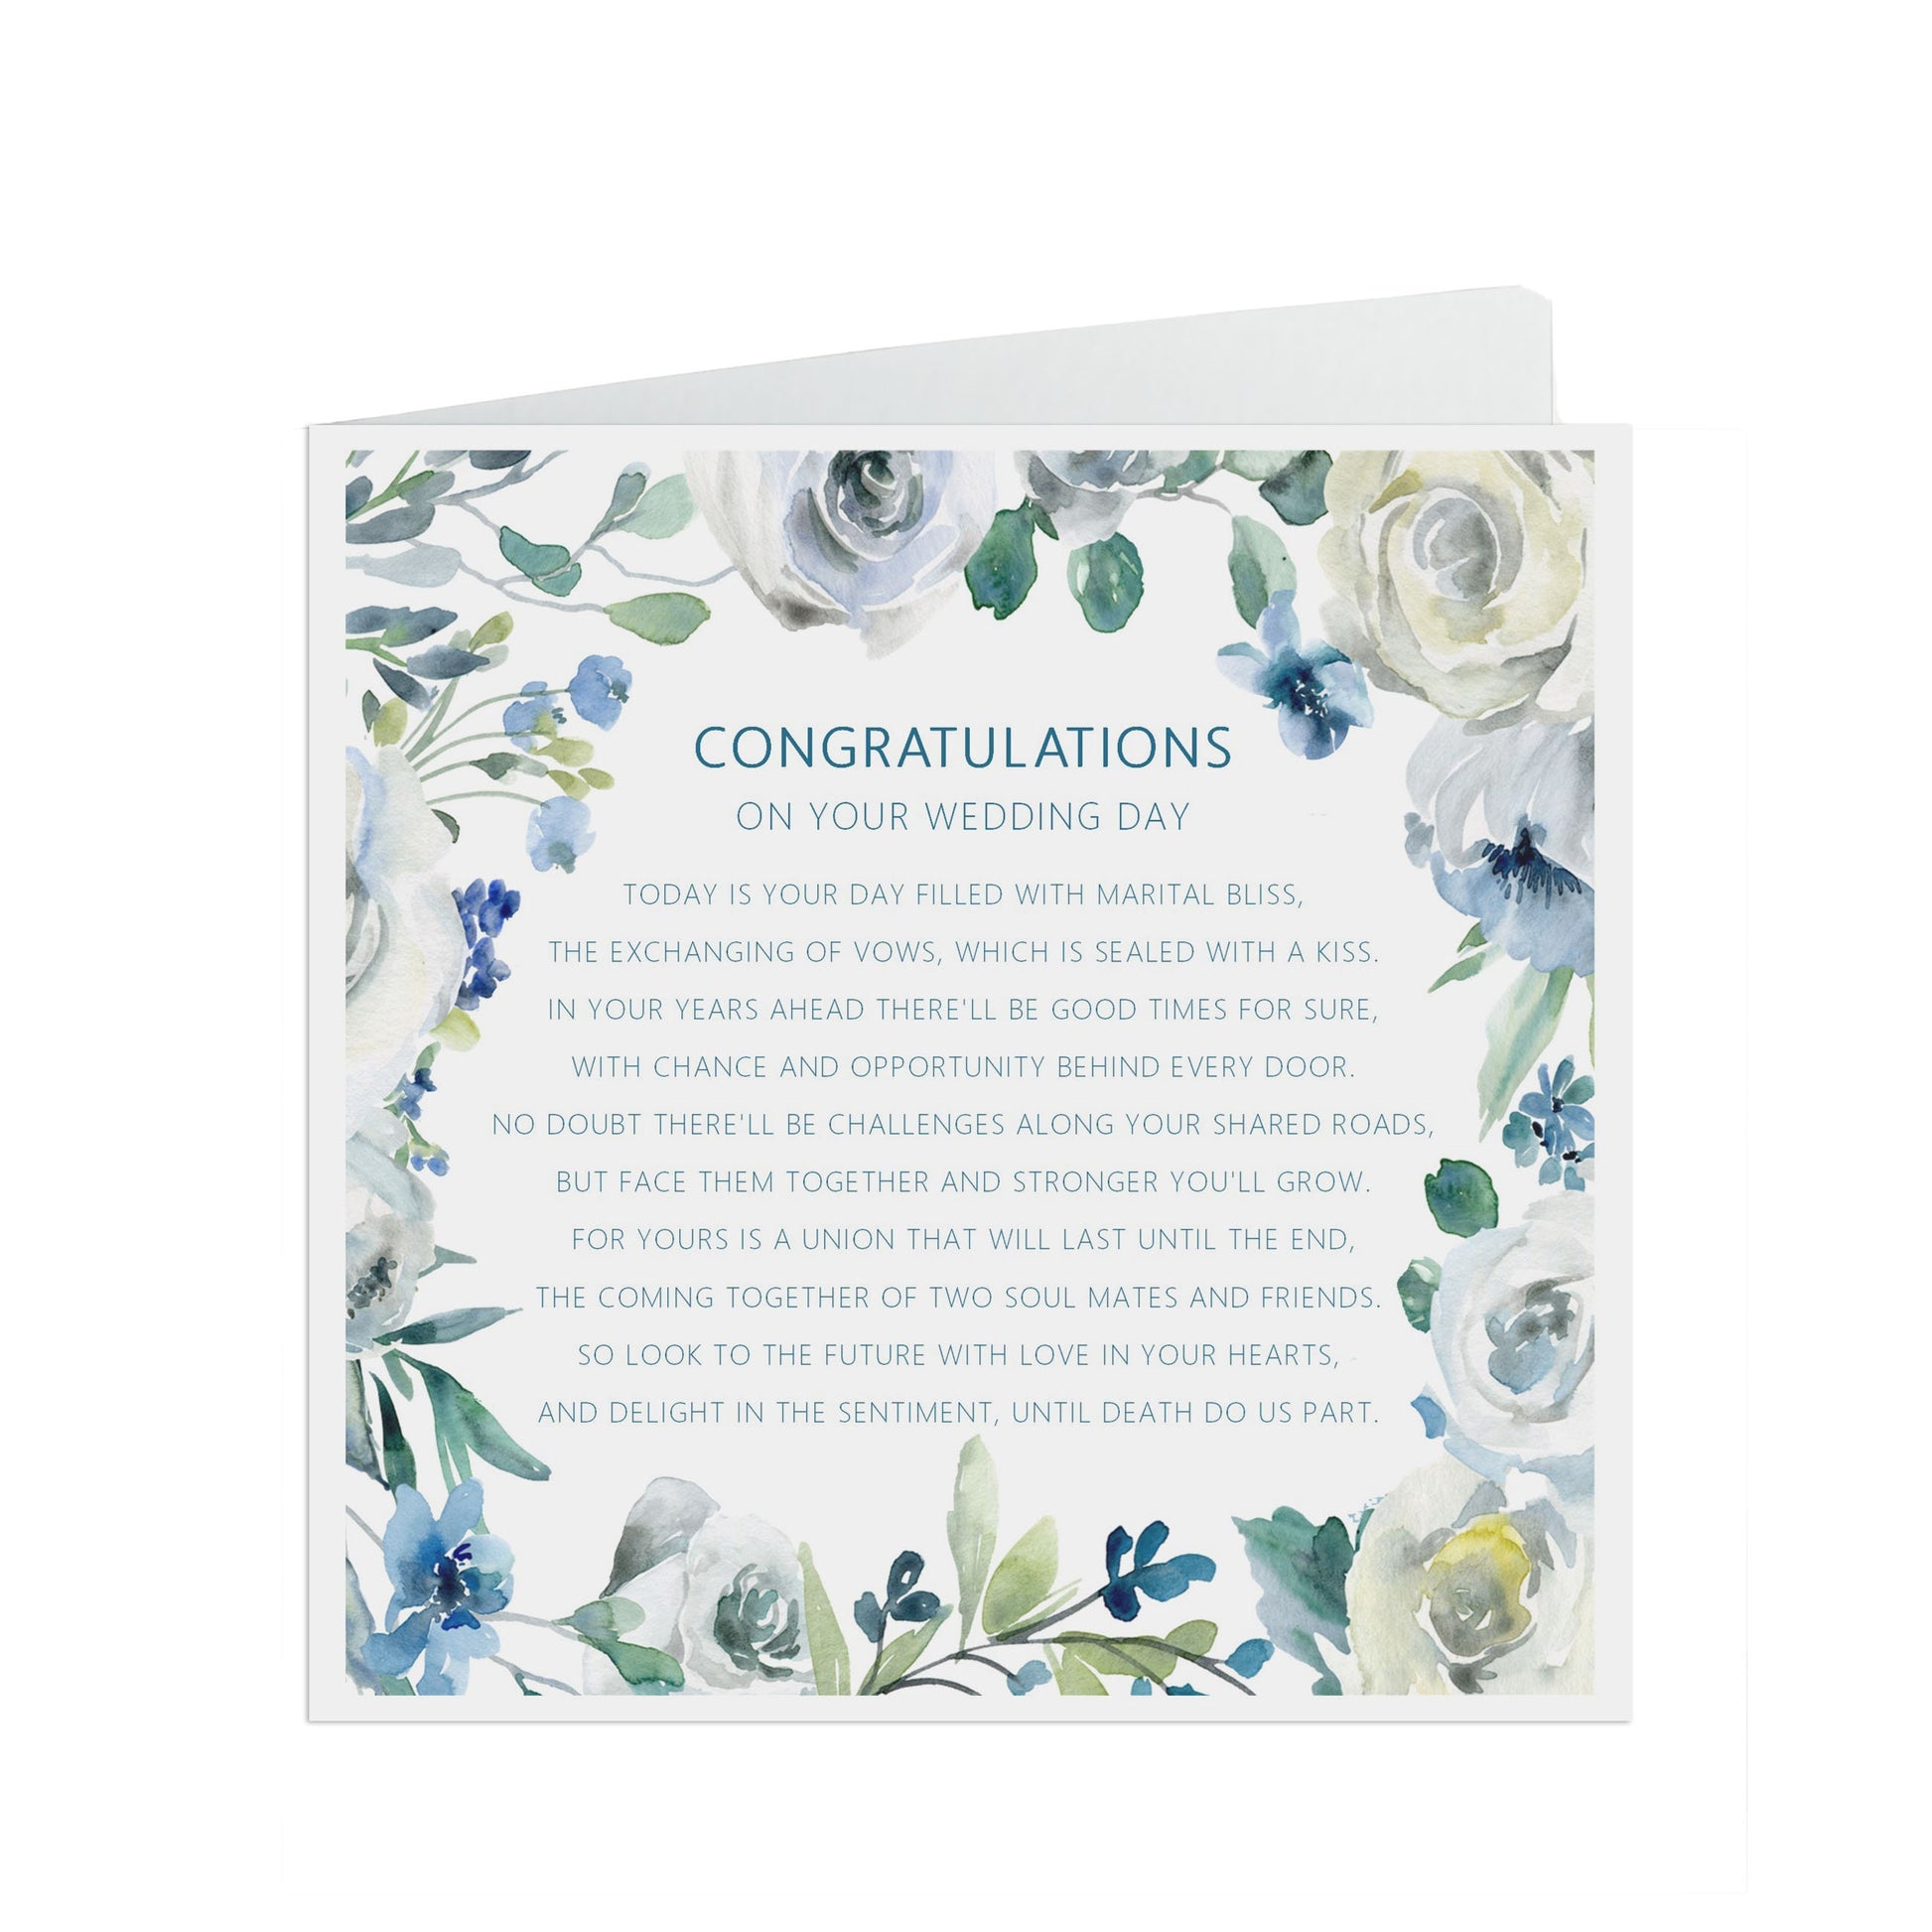 Congratulations On Your Wedding Day, Blue Floral Sentimental Poem, 6x6 Inches With A Kraft Envelope